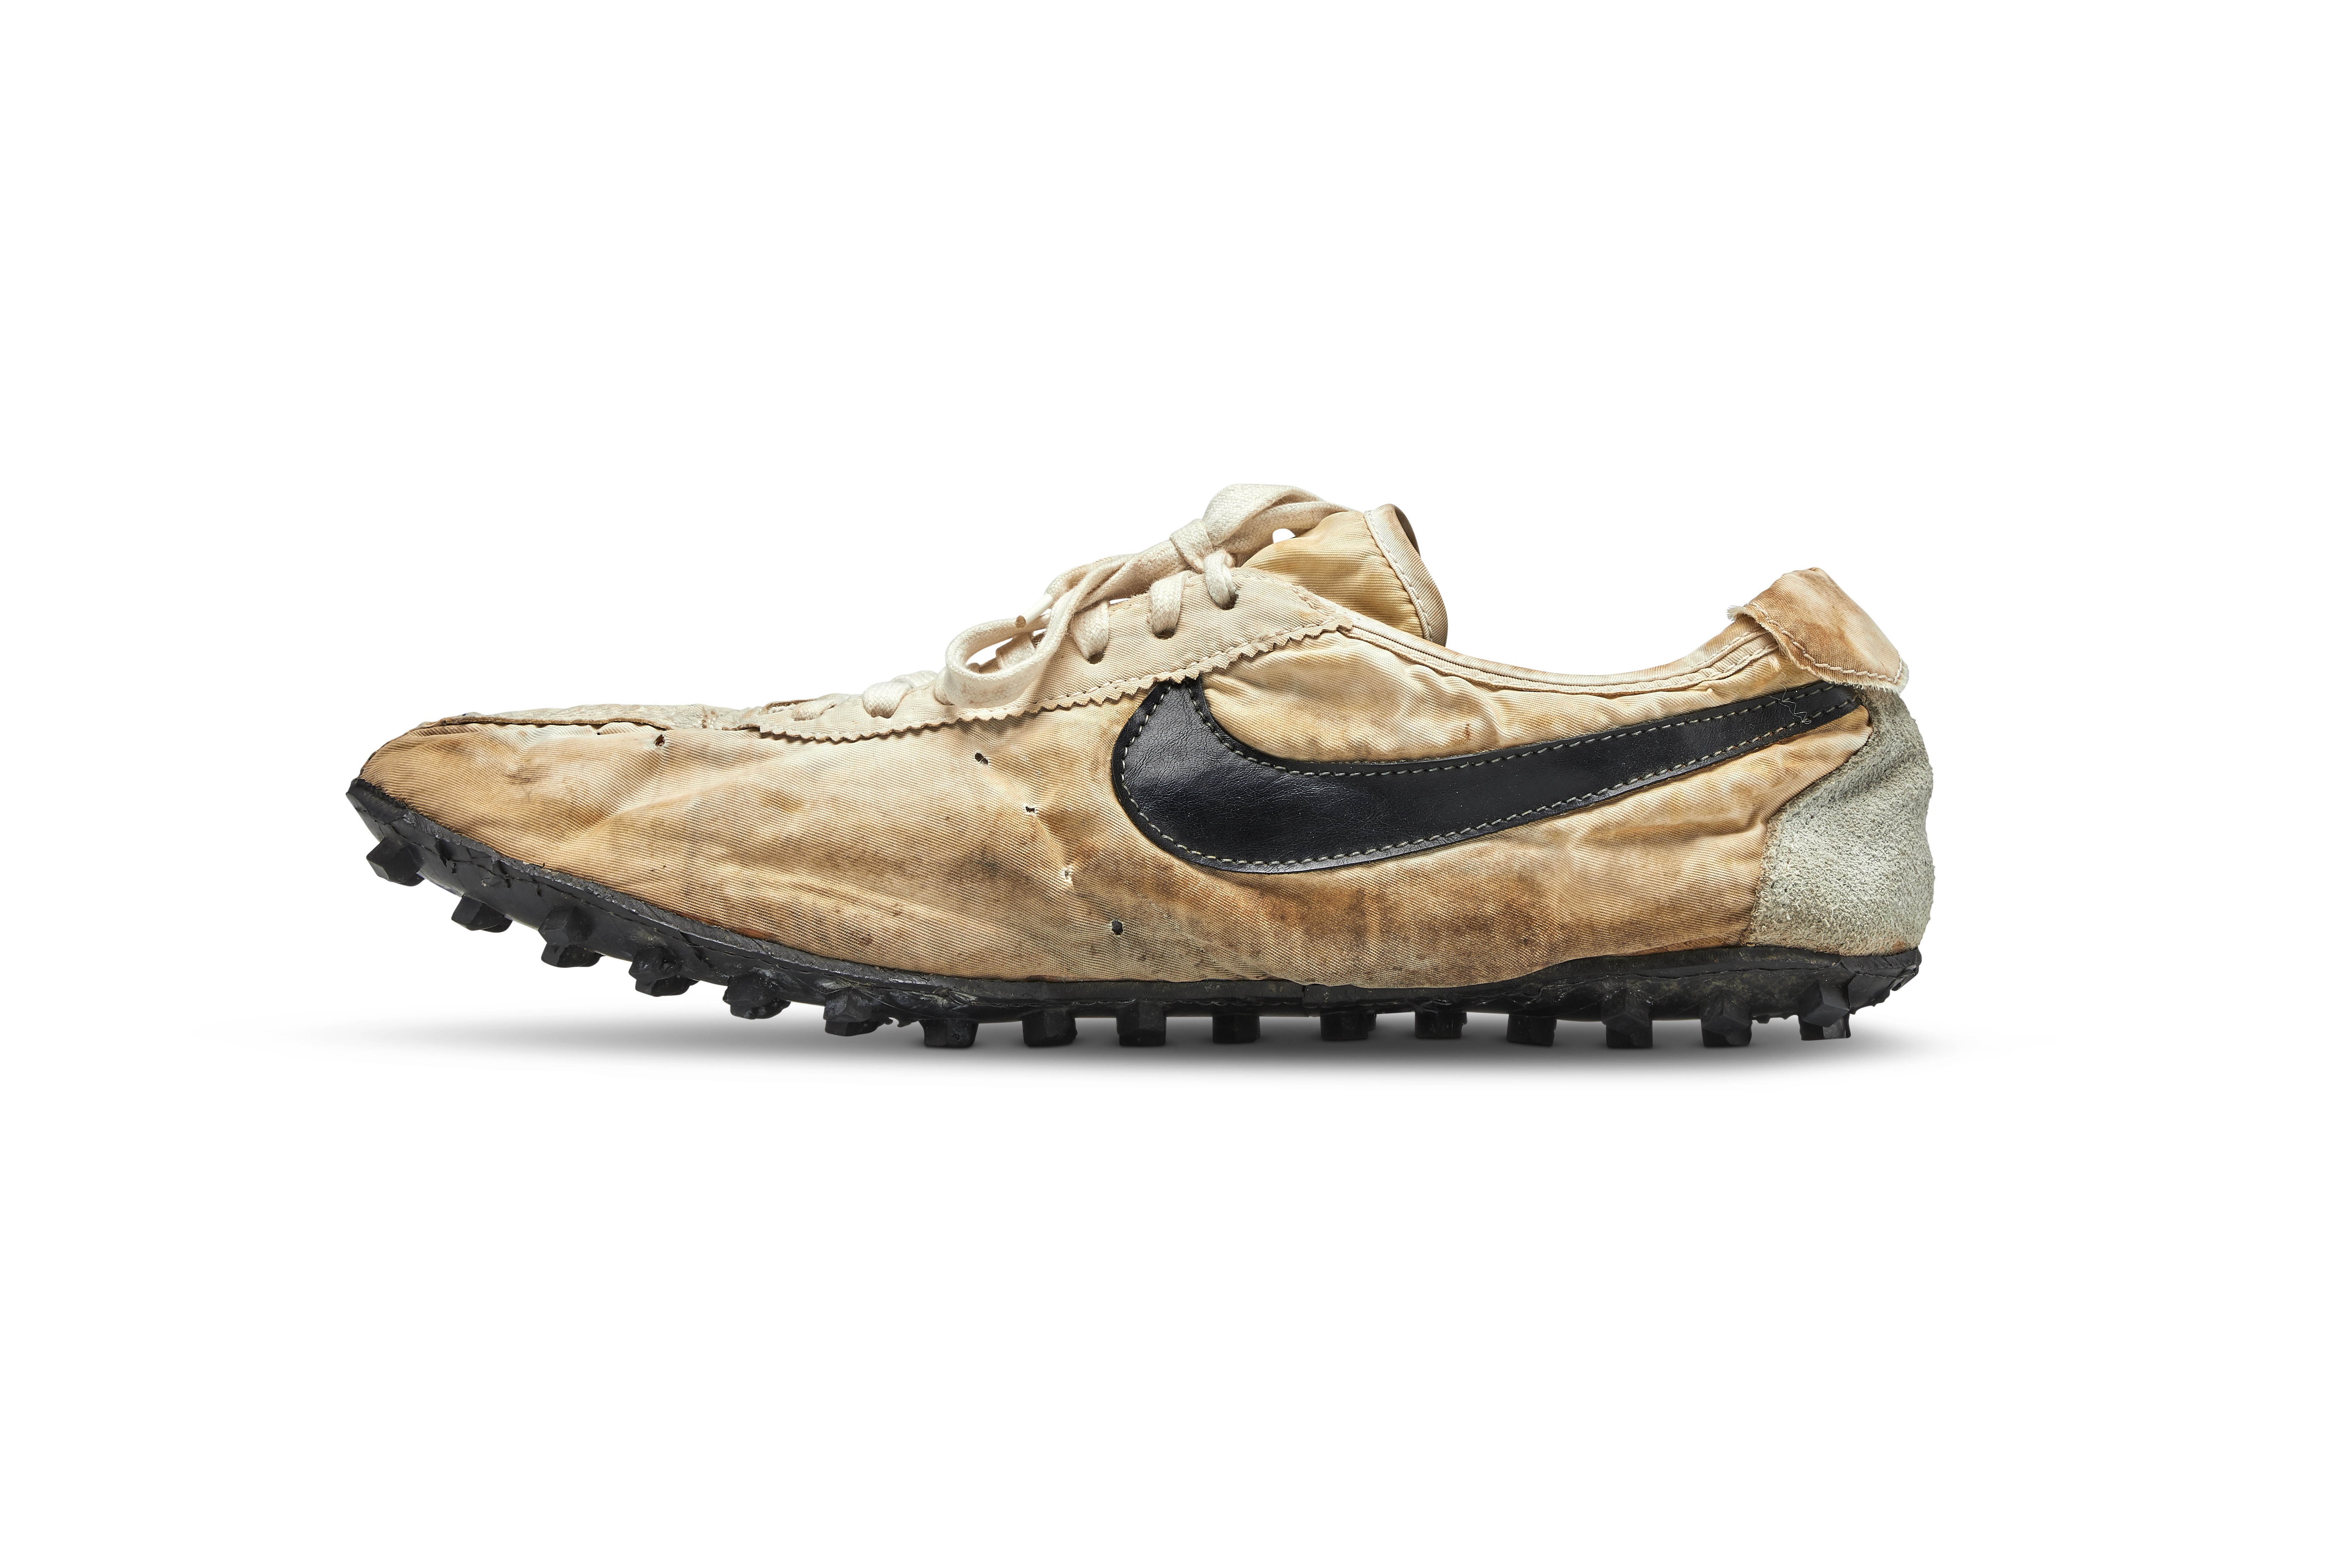 Rare Nike running shoes sell for 437 